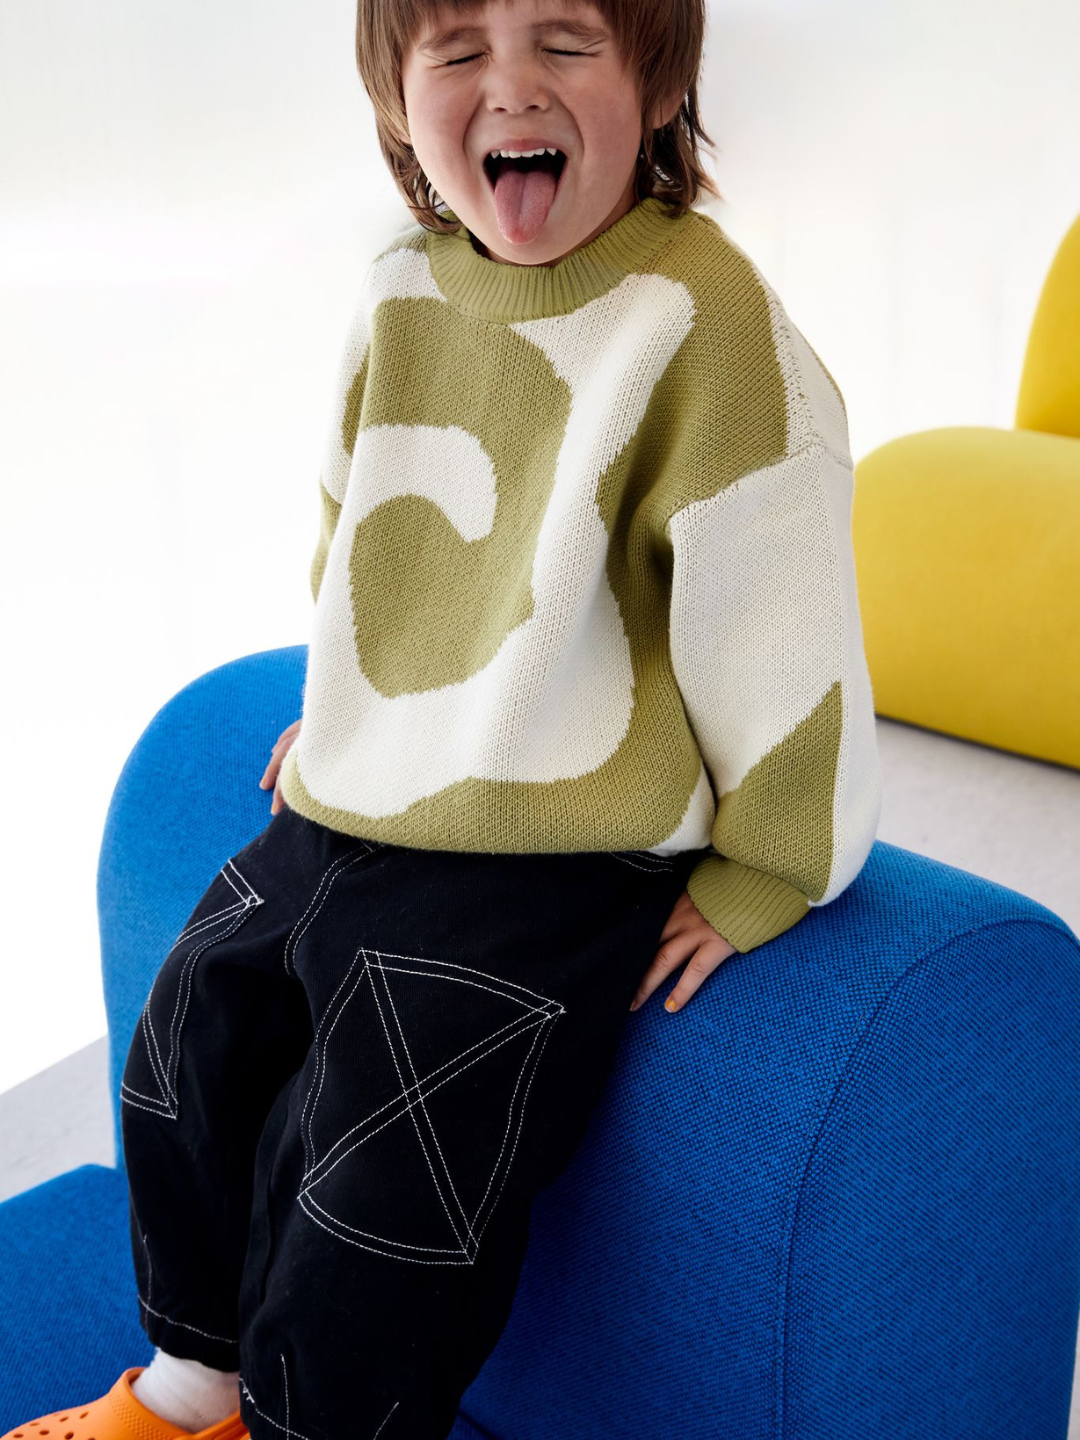 A child wearing a kids crewneck sweater in sage green, with a large single cream swirl design that covers the entire sweater. He is sticking his tongue out, with eyes closed, and sits on a blue chair. He wears black jeans with white stitching and orange shoes.